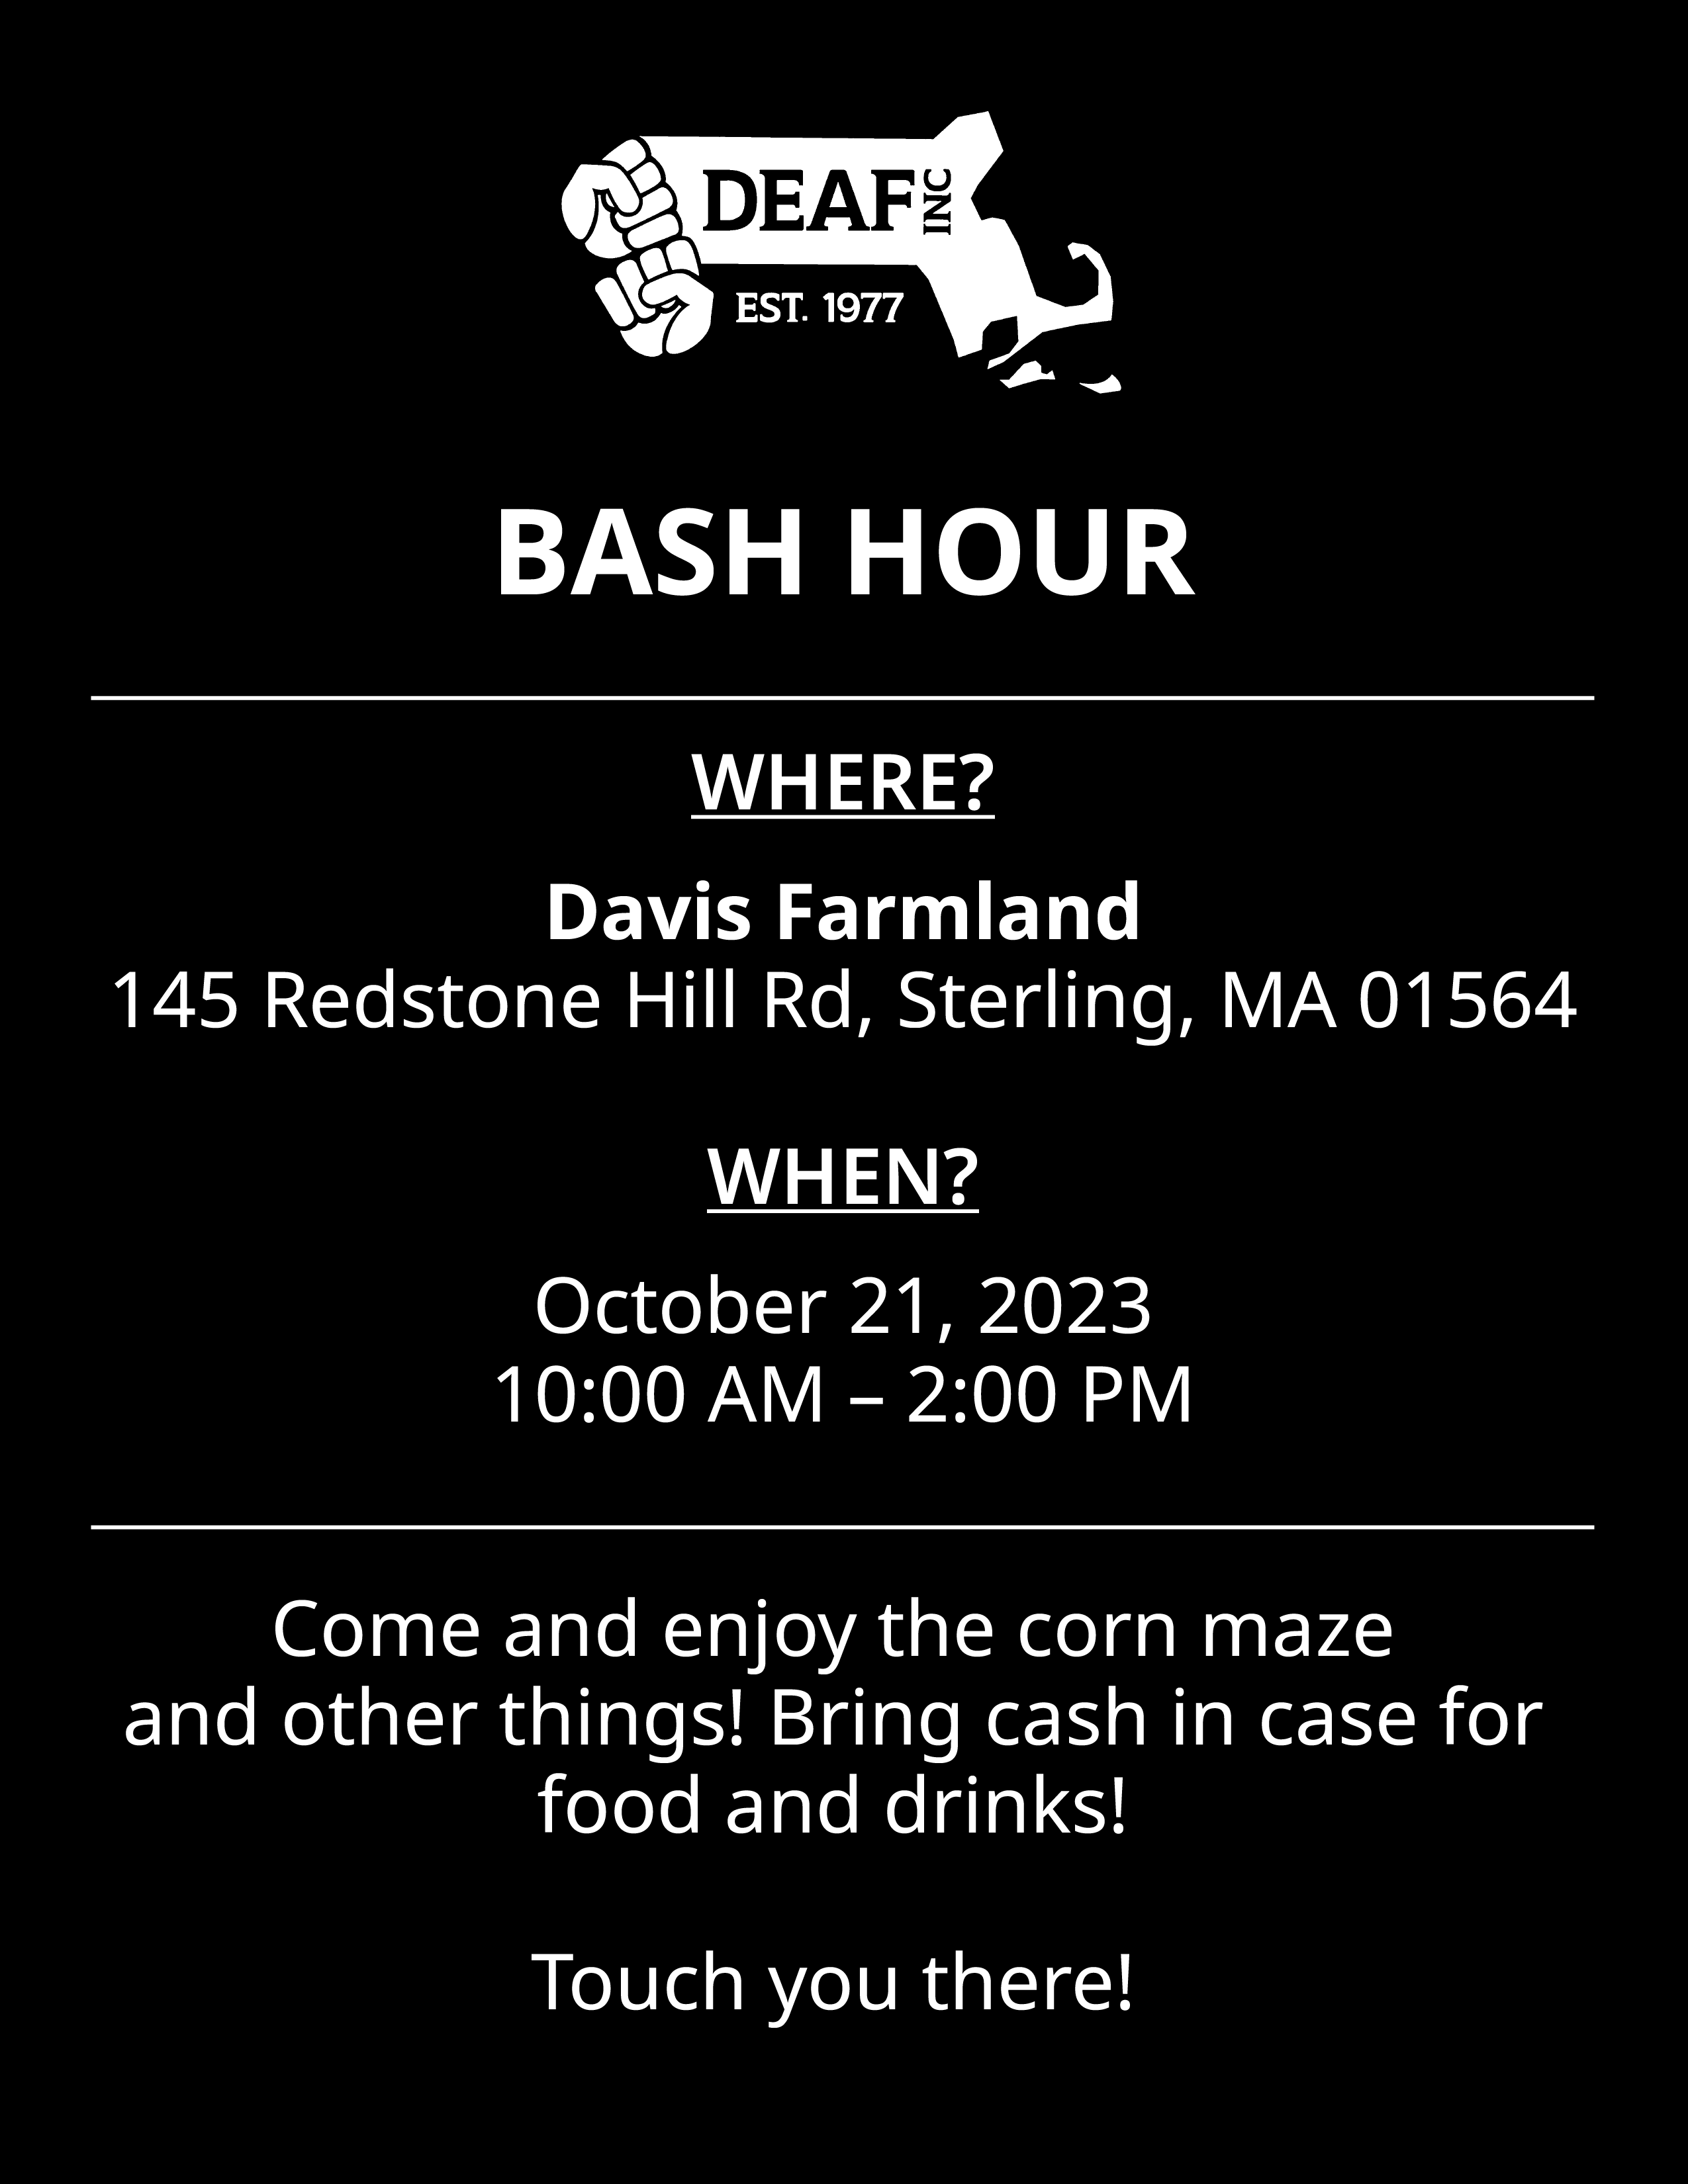 Flyer with black background, white text, and white DEAF, Inc. logo. BASH HOUR WHERE? Davis Farmland, 145 Redstone Hill Rd, Sterling, MA 01564 WHEN? October 21, 2023, 10:00 AM - 2:00 PM Come and enjoy the corn maze and other things! Bring cash in case for food and drinks! Touch you there!